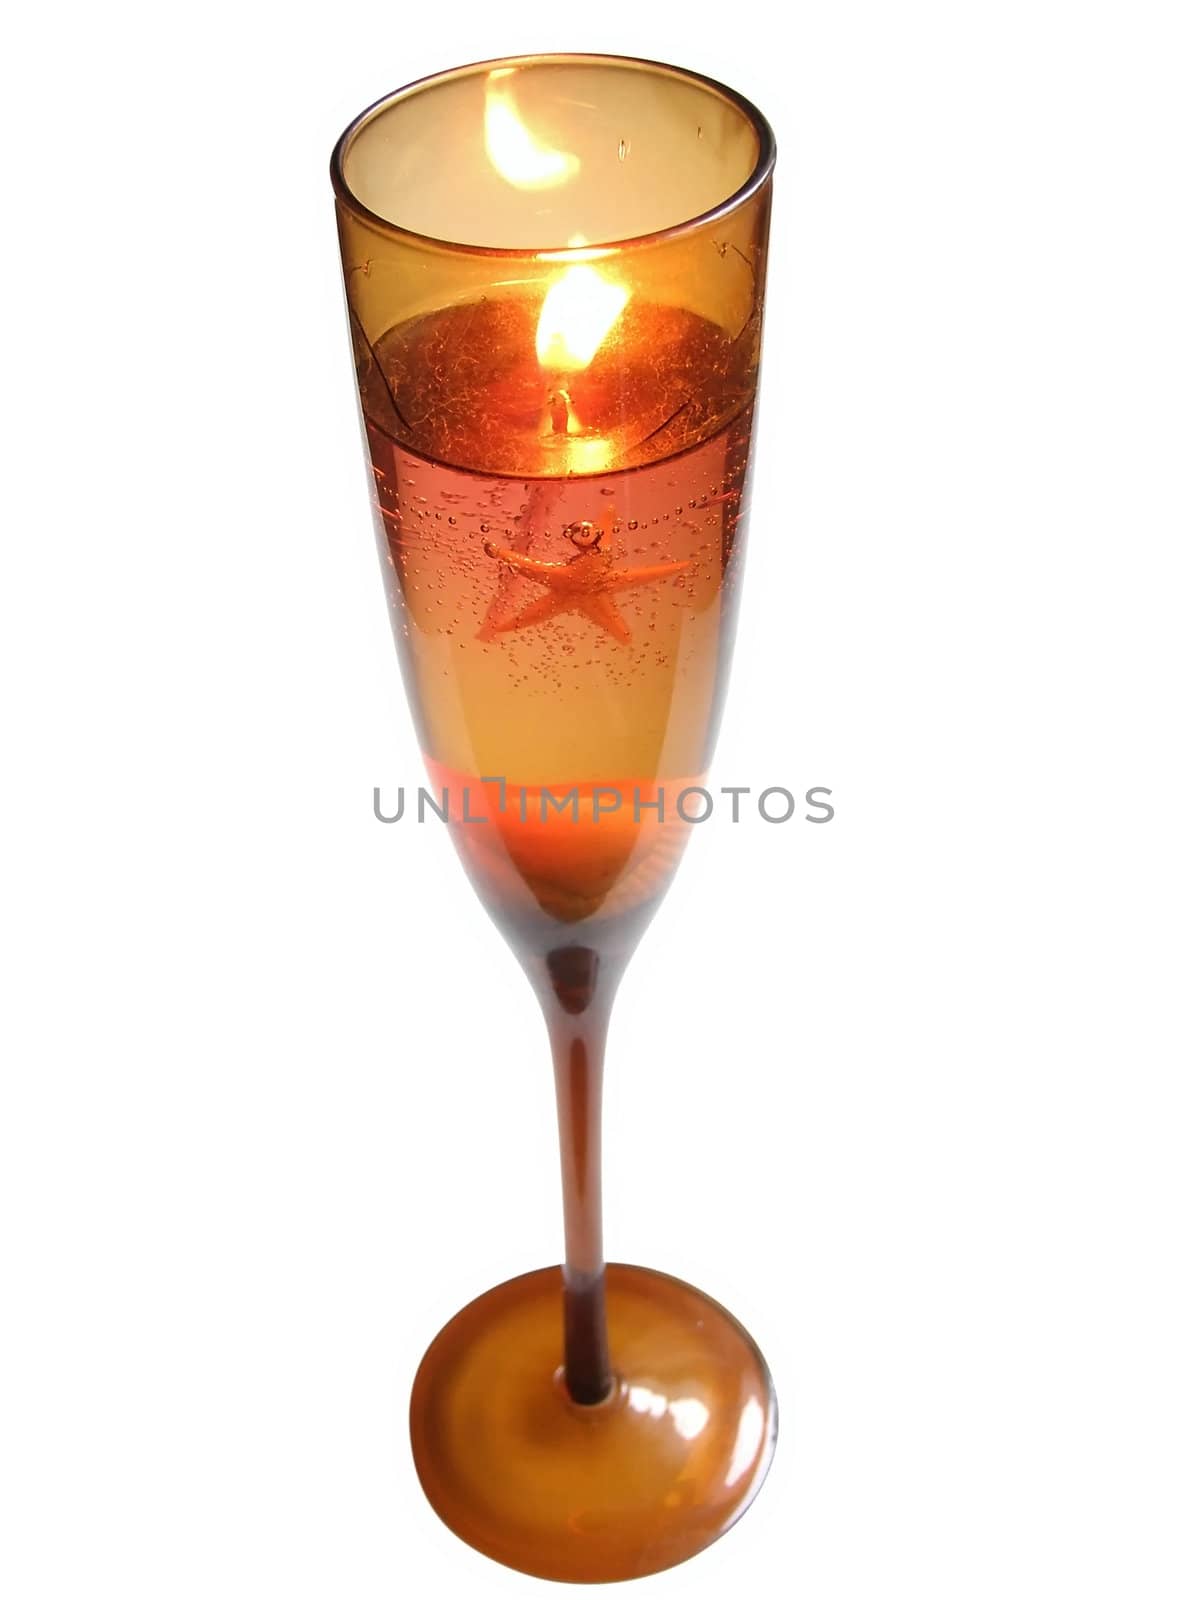 Candle in wineglass with sea star and shells